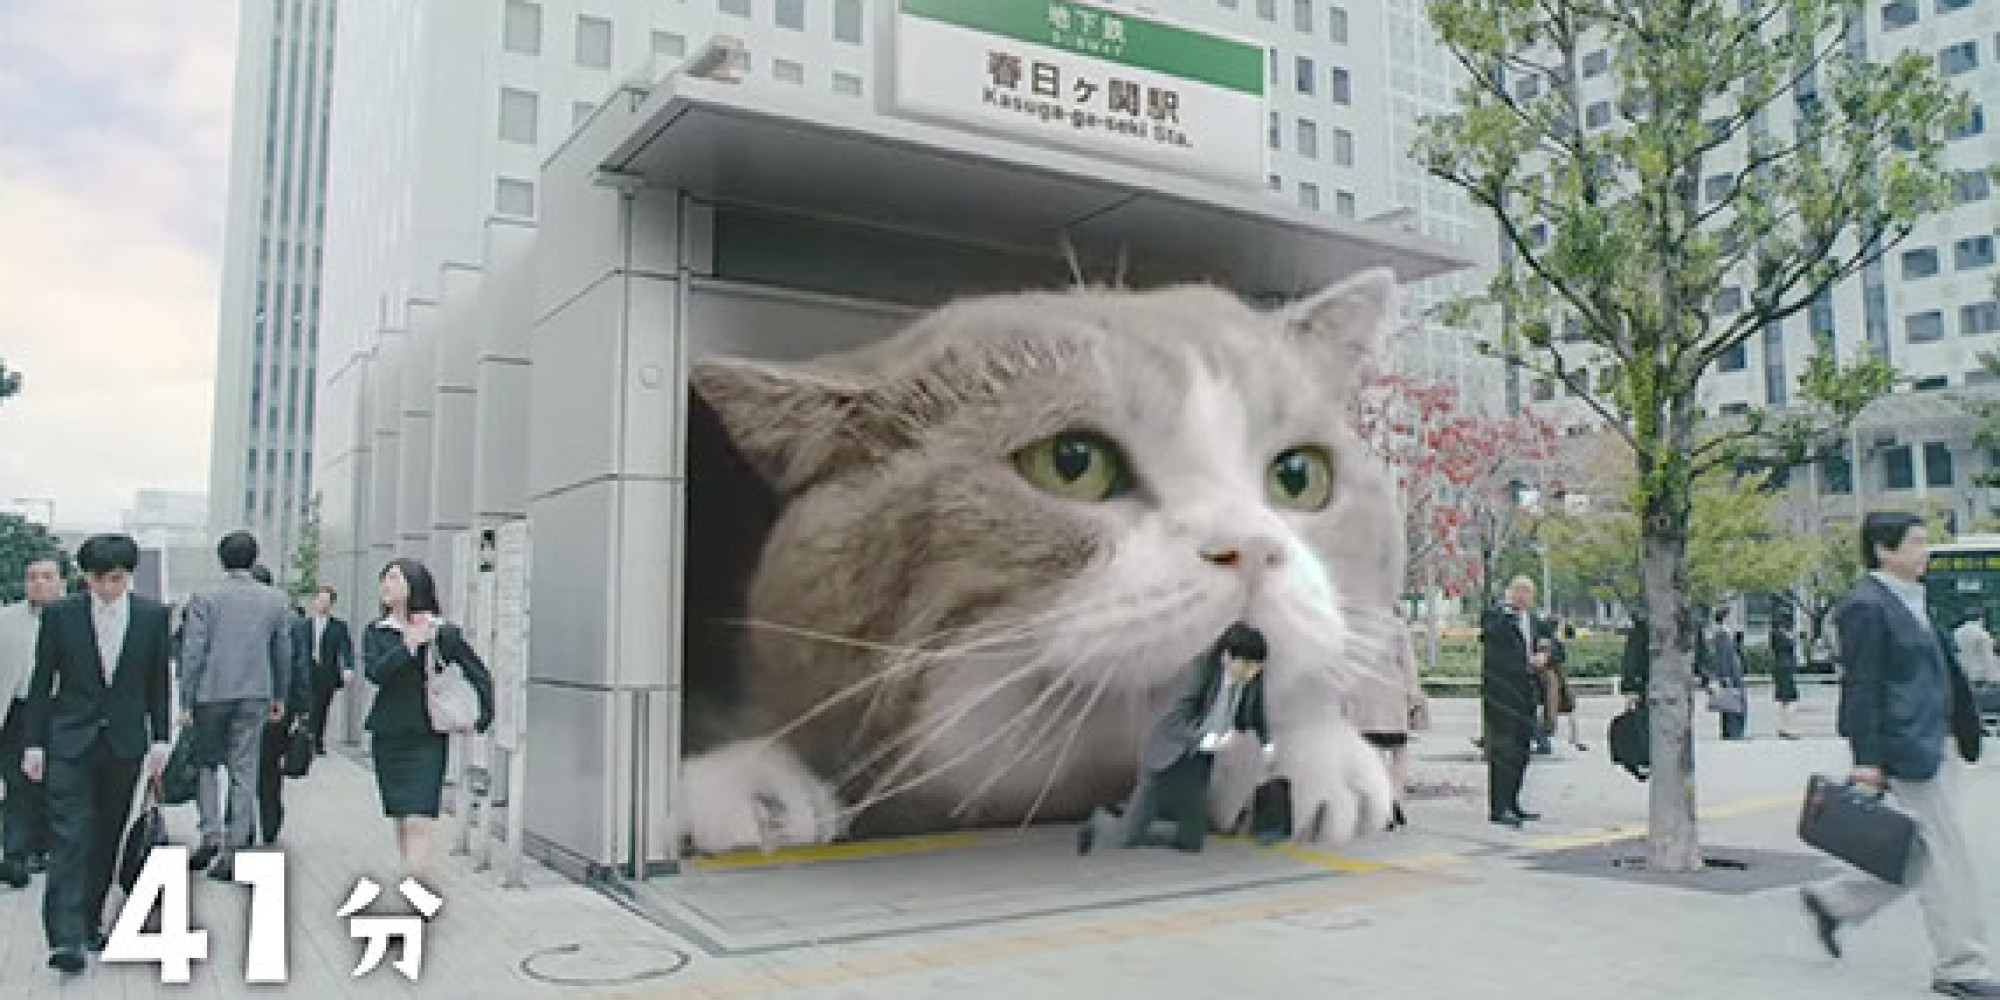 lotte chewing gum advertisement, giant cat, wtf